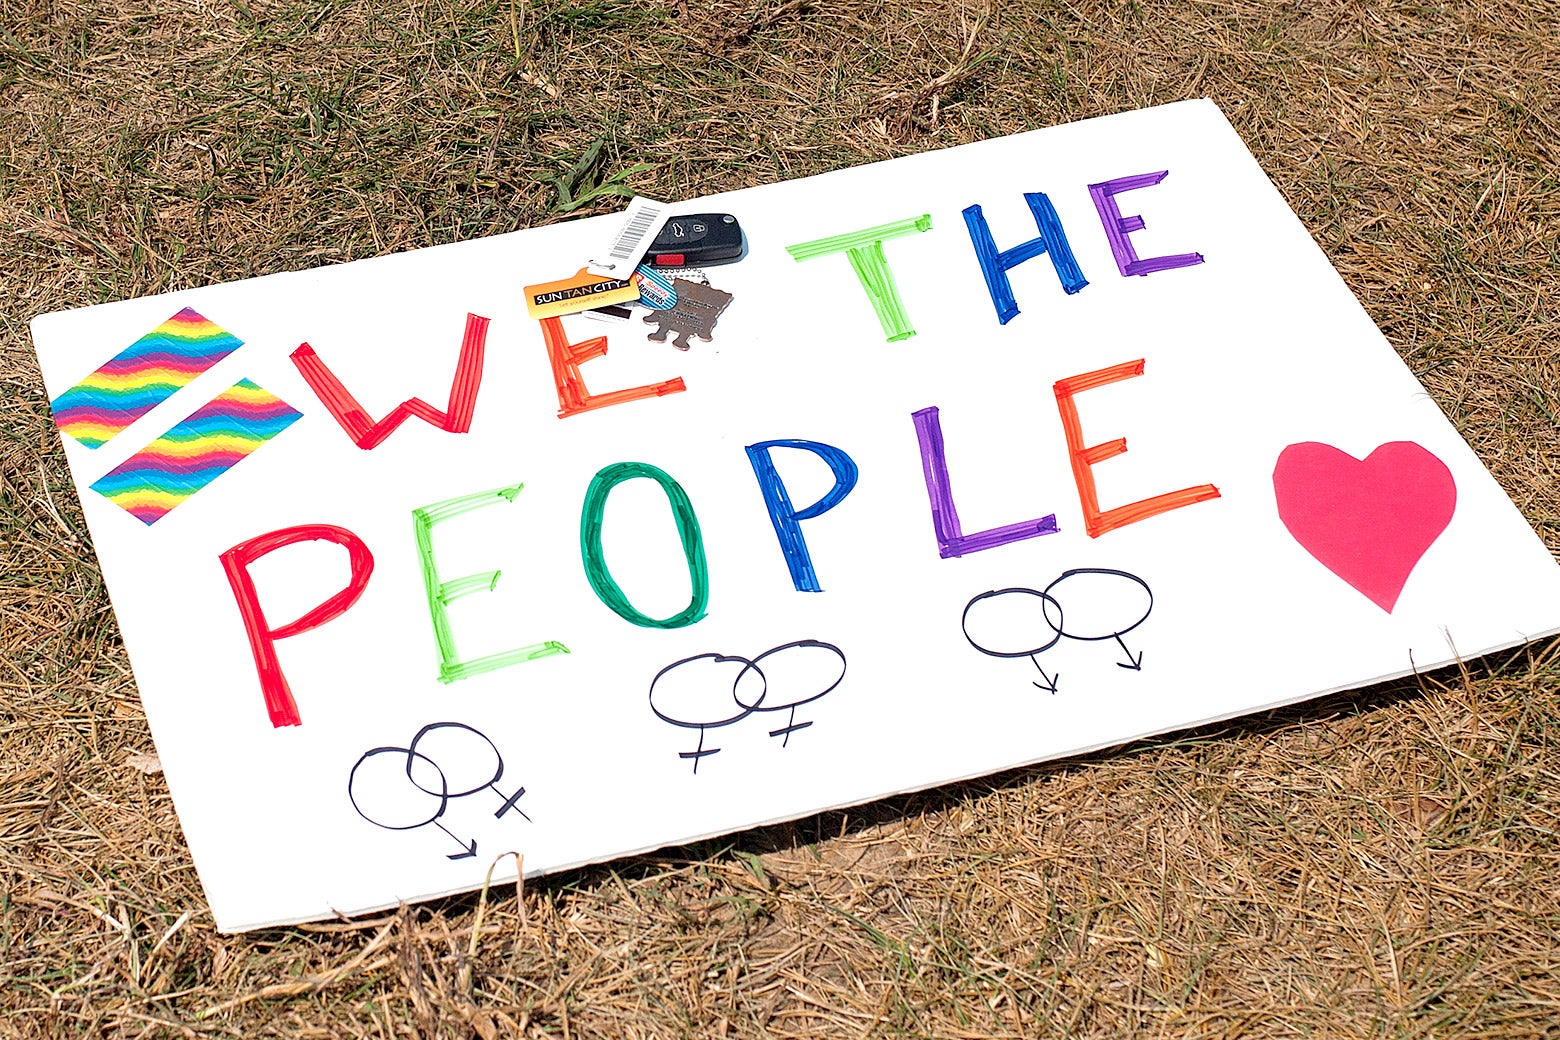 A sign supporting same-sex marriage ("We the People" with rainbow-colored lettering, a heart, and intertwined female symbols) lies on the ground in front of the Rowan County Courthouse on Sep. 2, 2015, in Morehead, Kentucky.